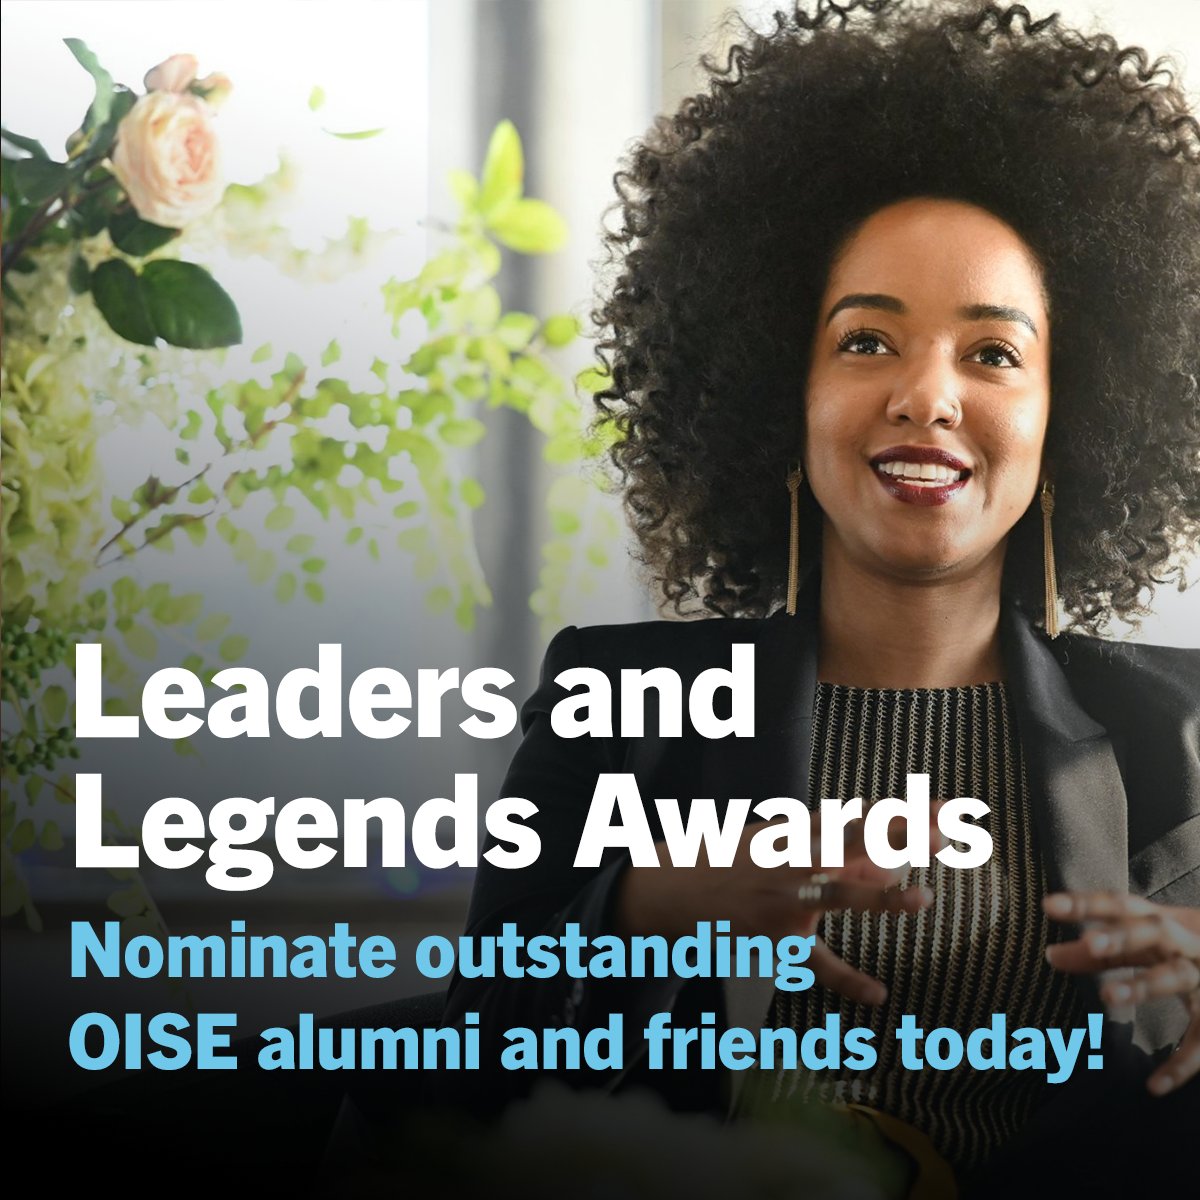 Know someone shaping the future of education? It's time to celebrate their impact! The Leaders and Legends Awards by OISE are back — nominate outstanding alumni and friends by May 8. 🏆 bit.ly/3vRZpcG